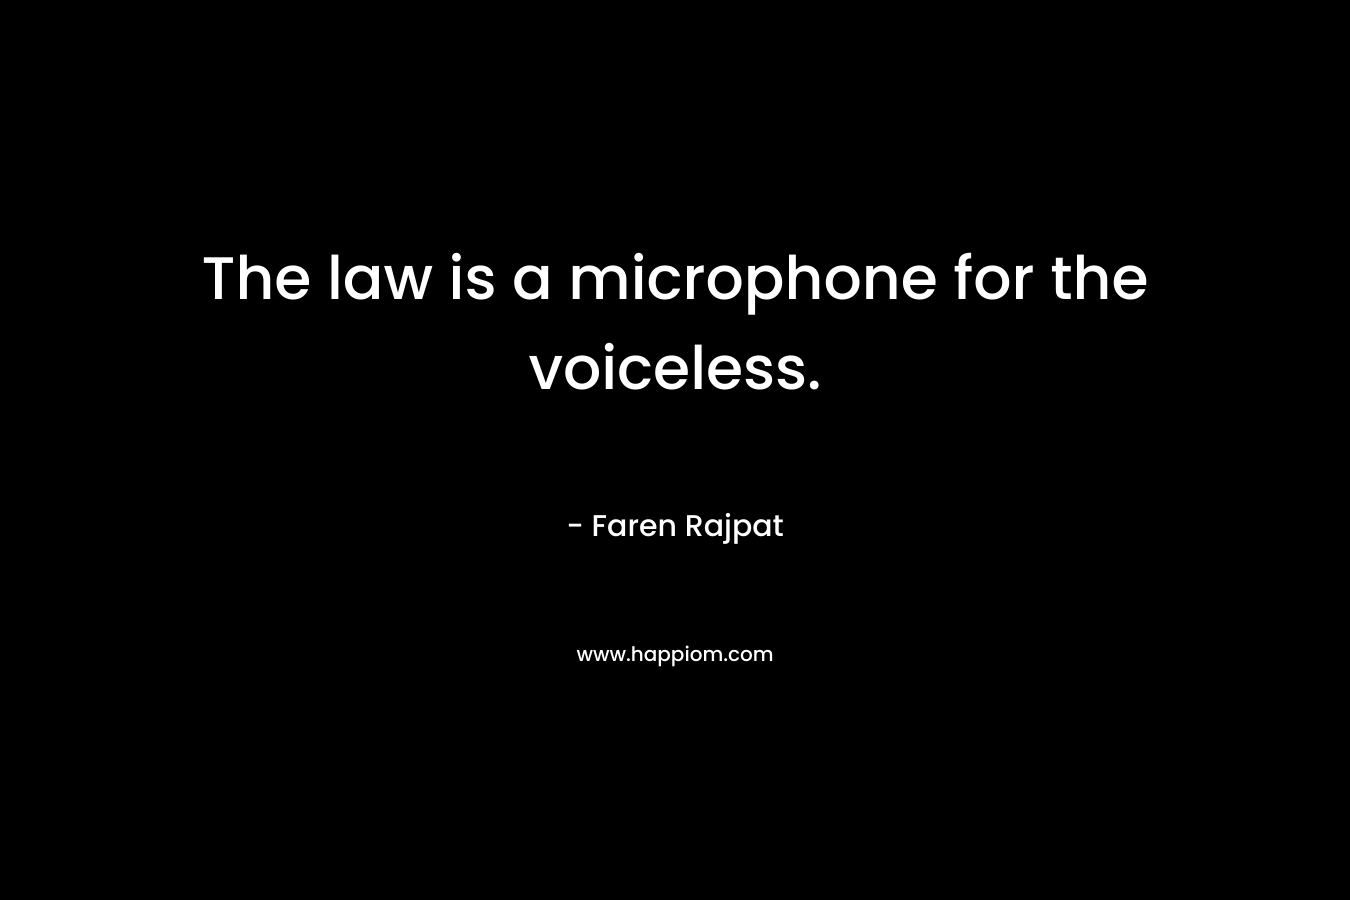 The law is a microphone for the voiceless.